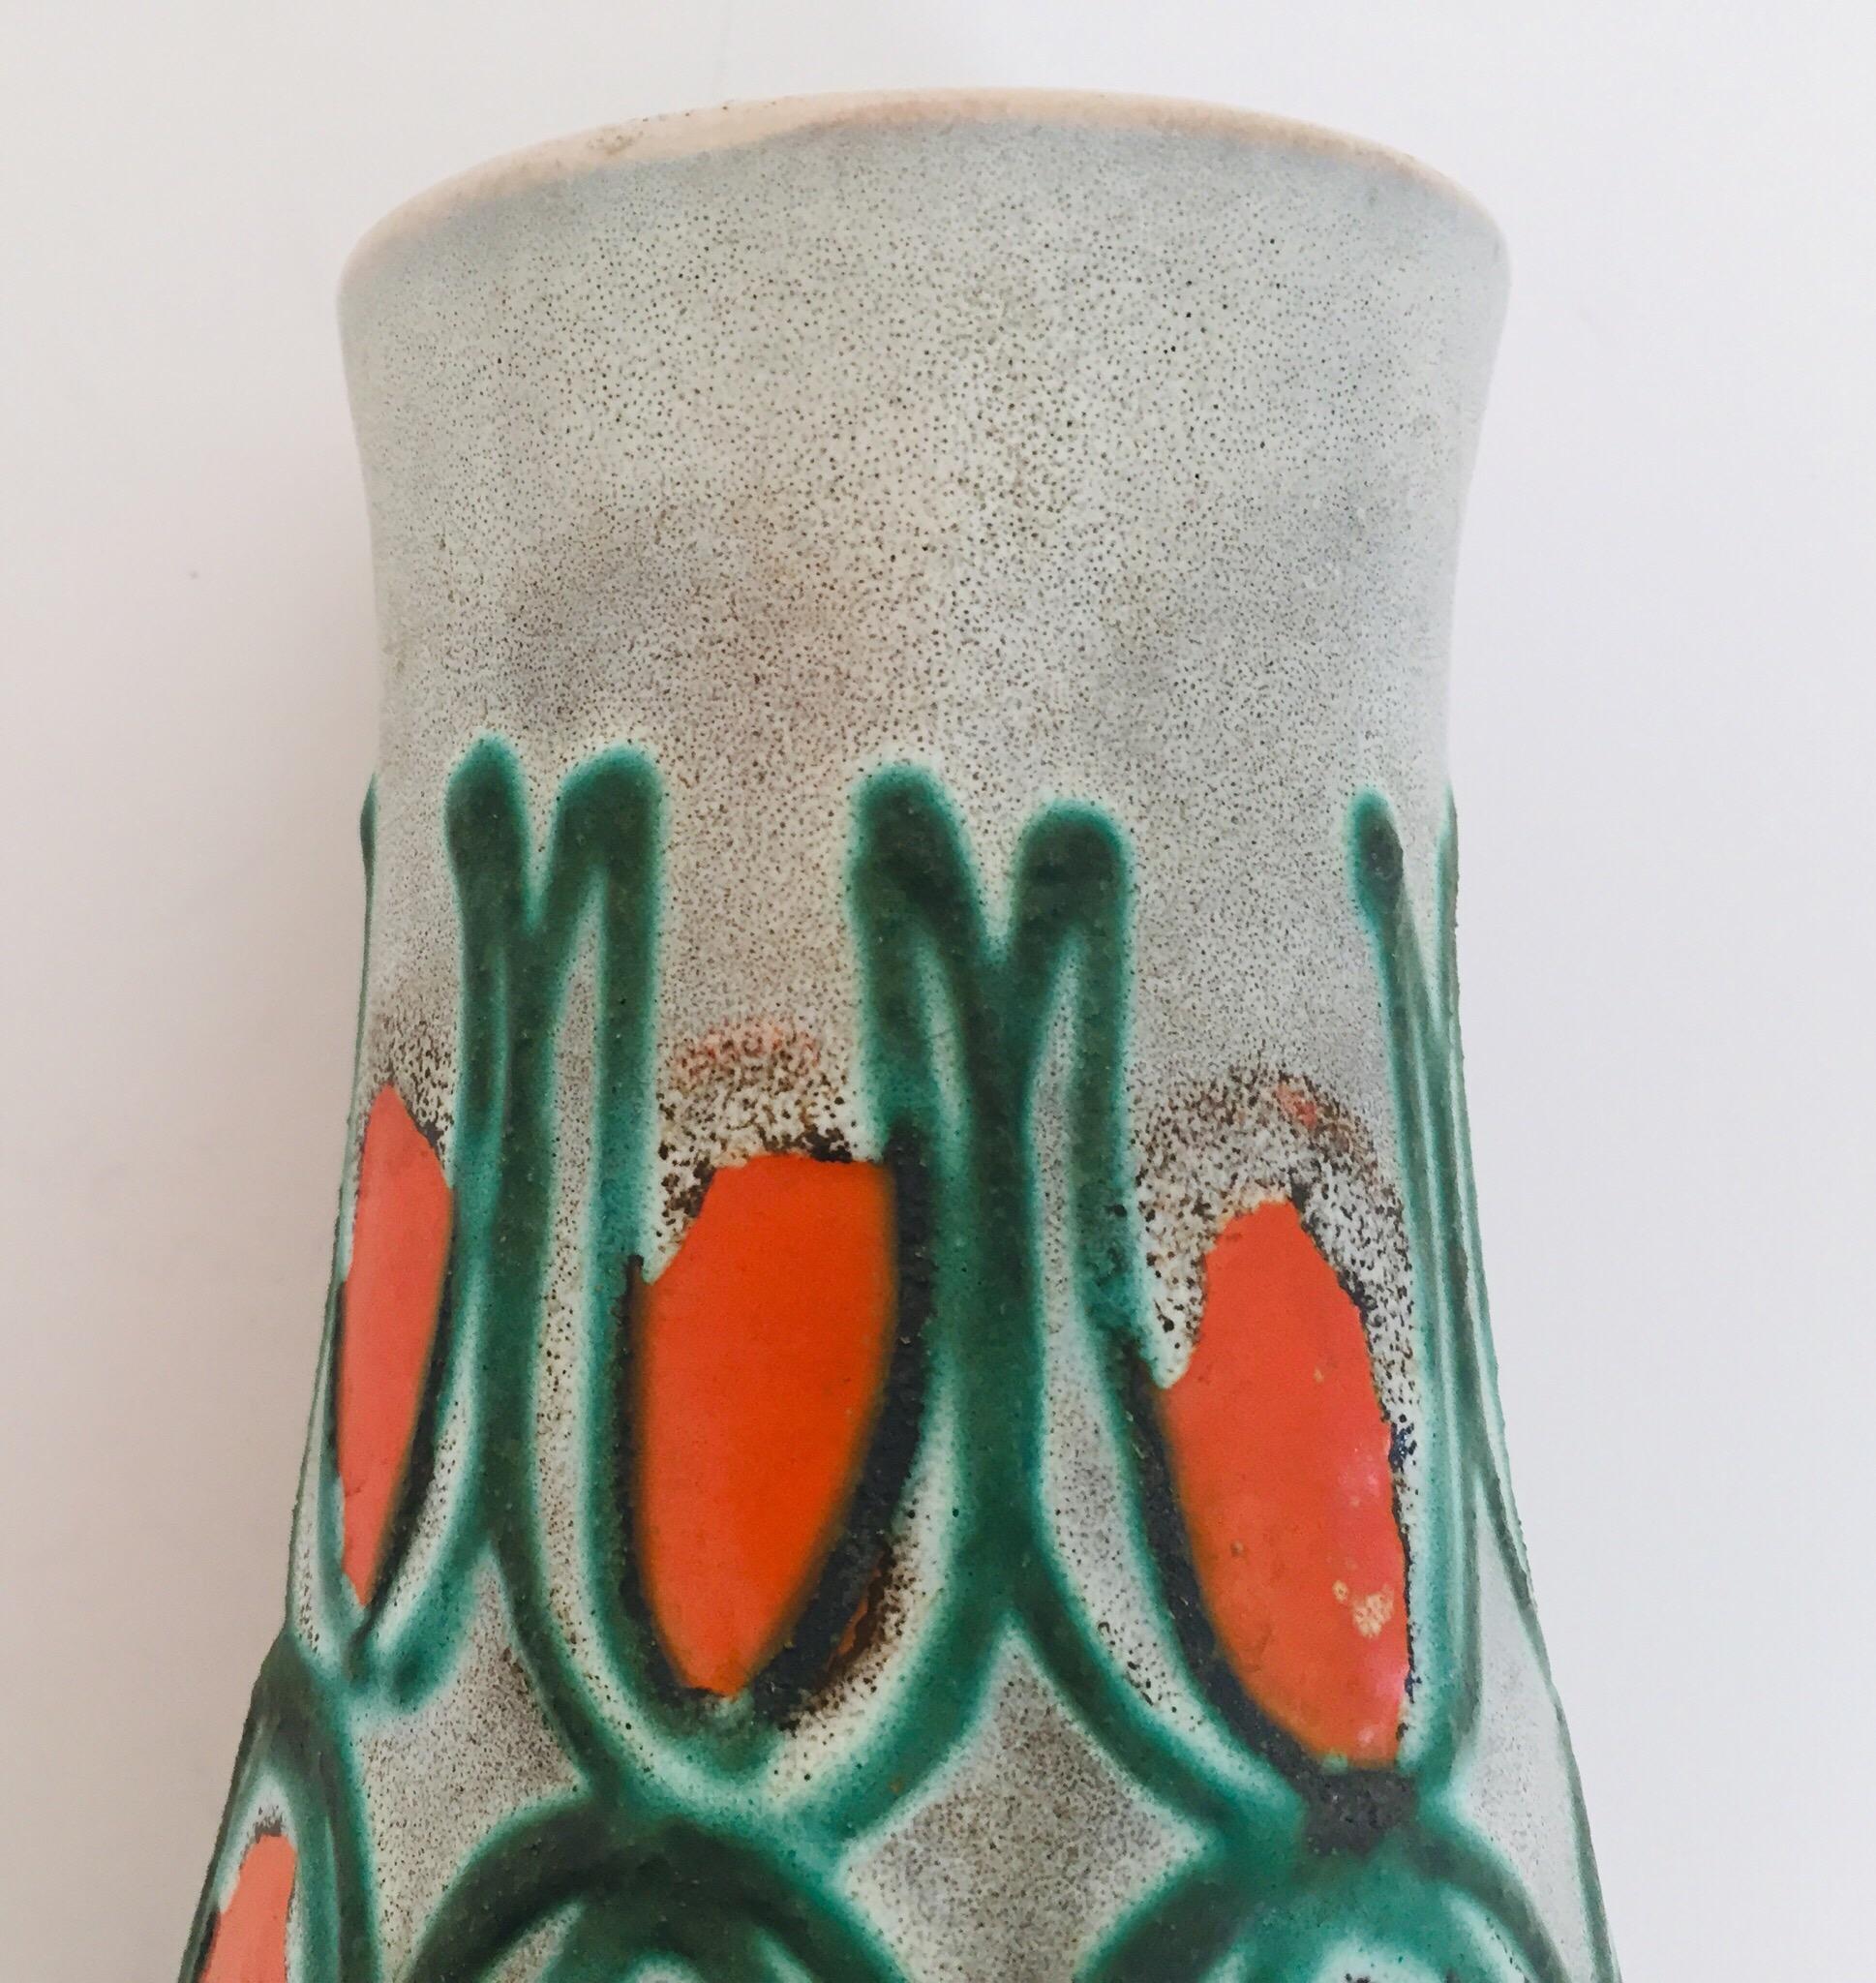 1950s Midcentury Glazed Vase with Red and Green, Strehla East Germany GDR 5